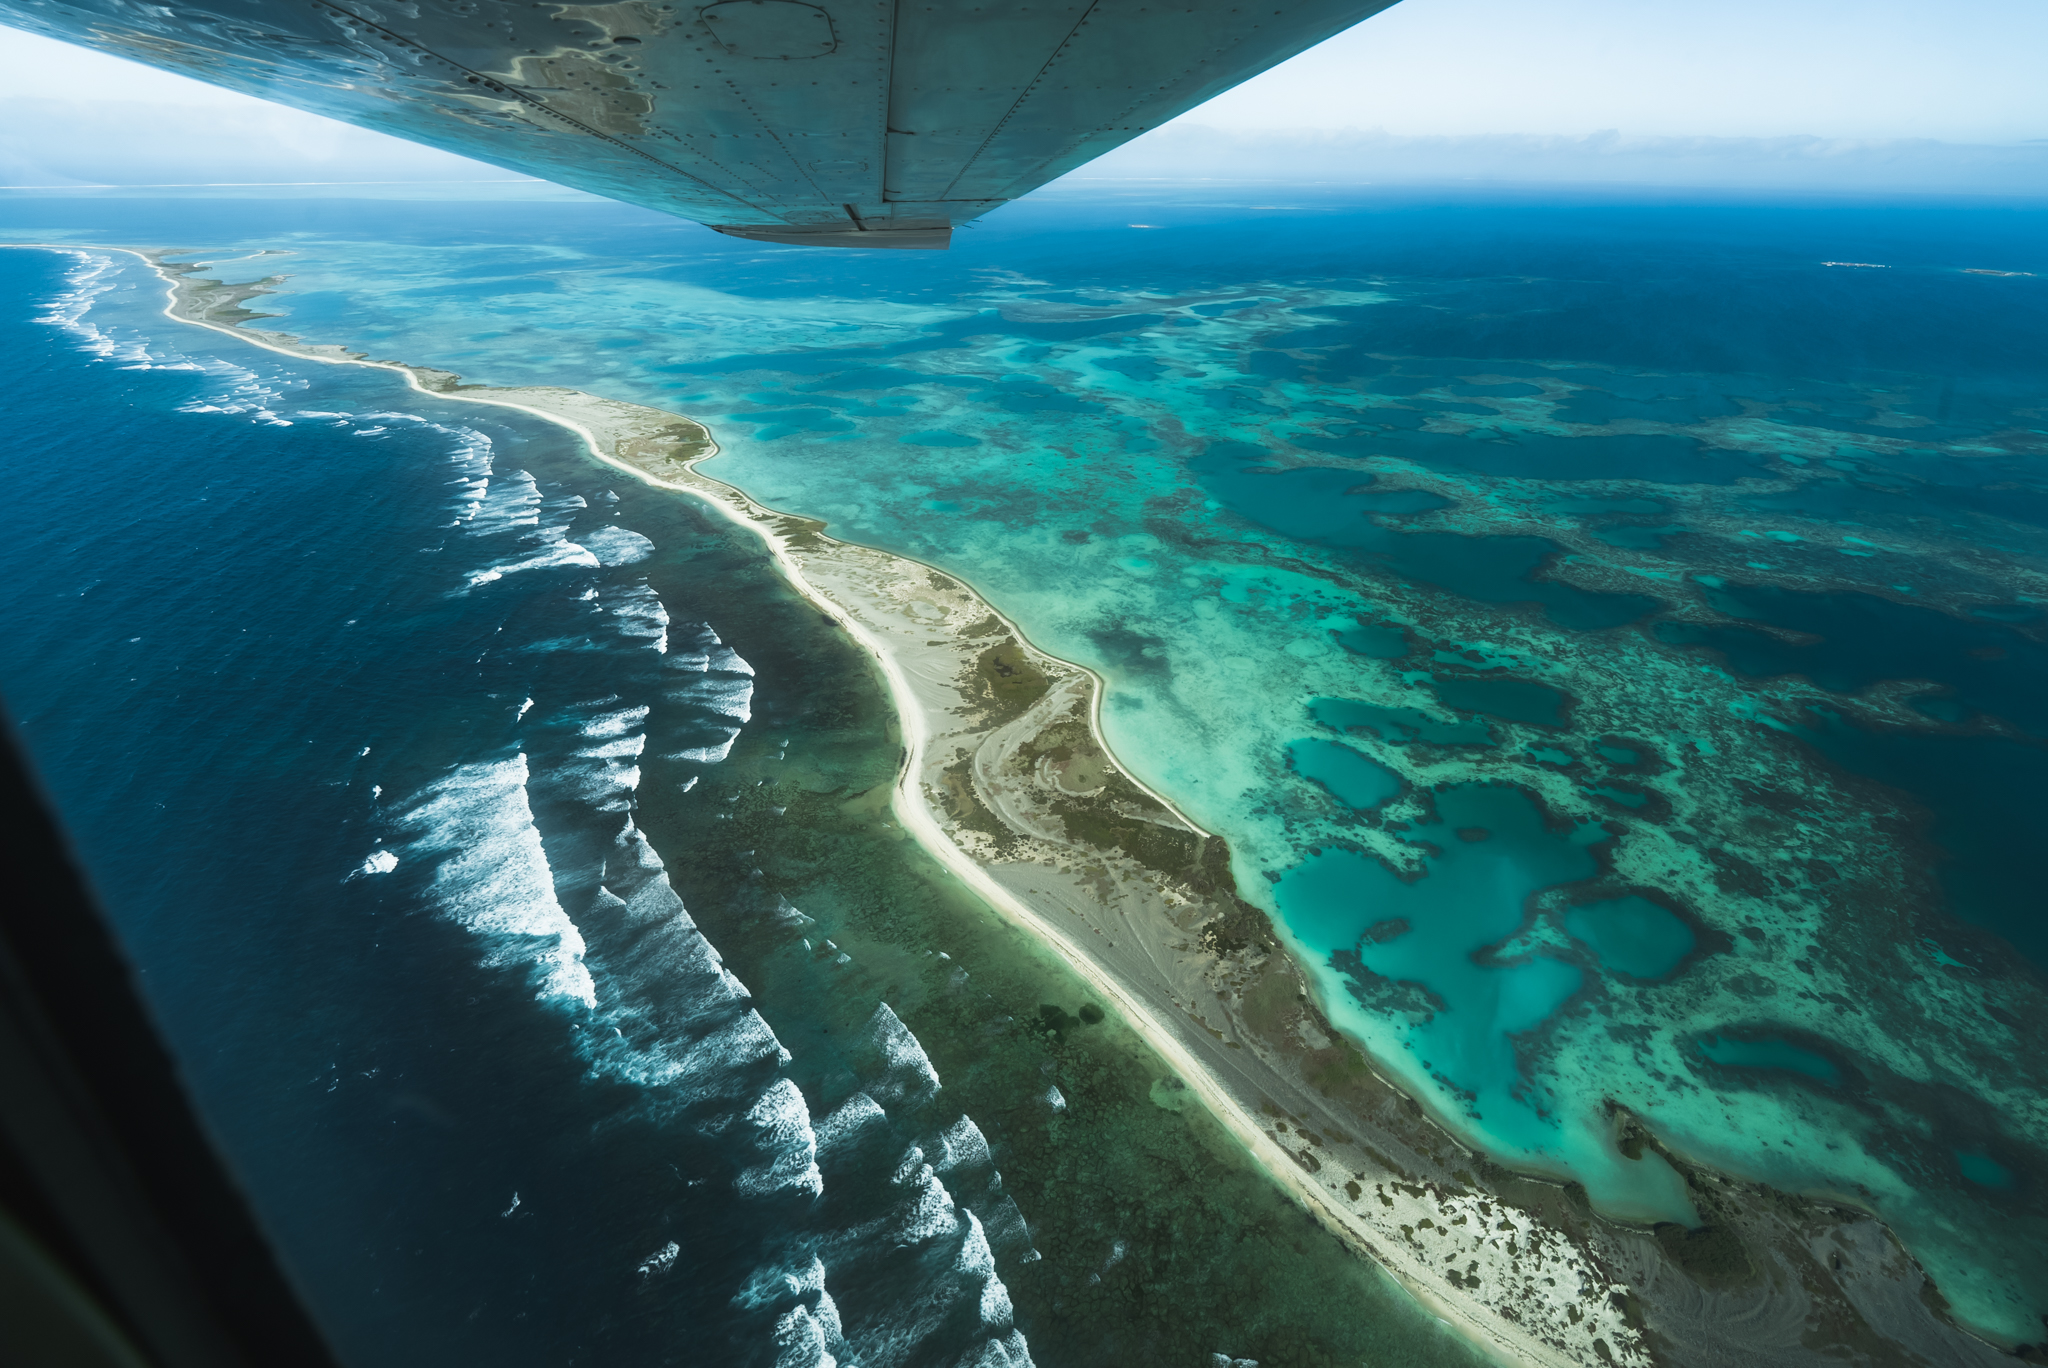 Escape to the Abrolhos Islands – Half Day Tour